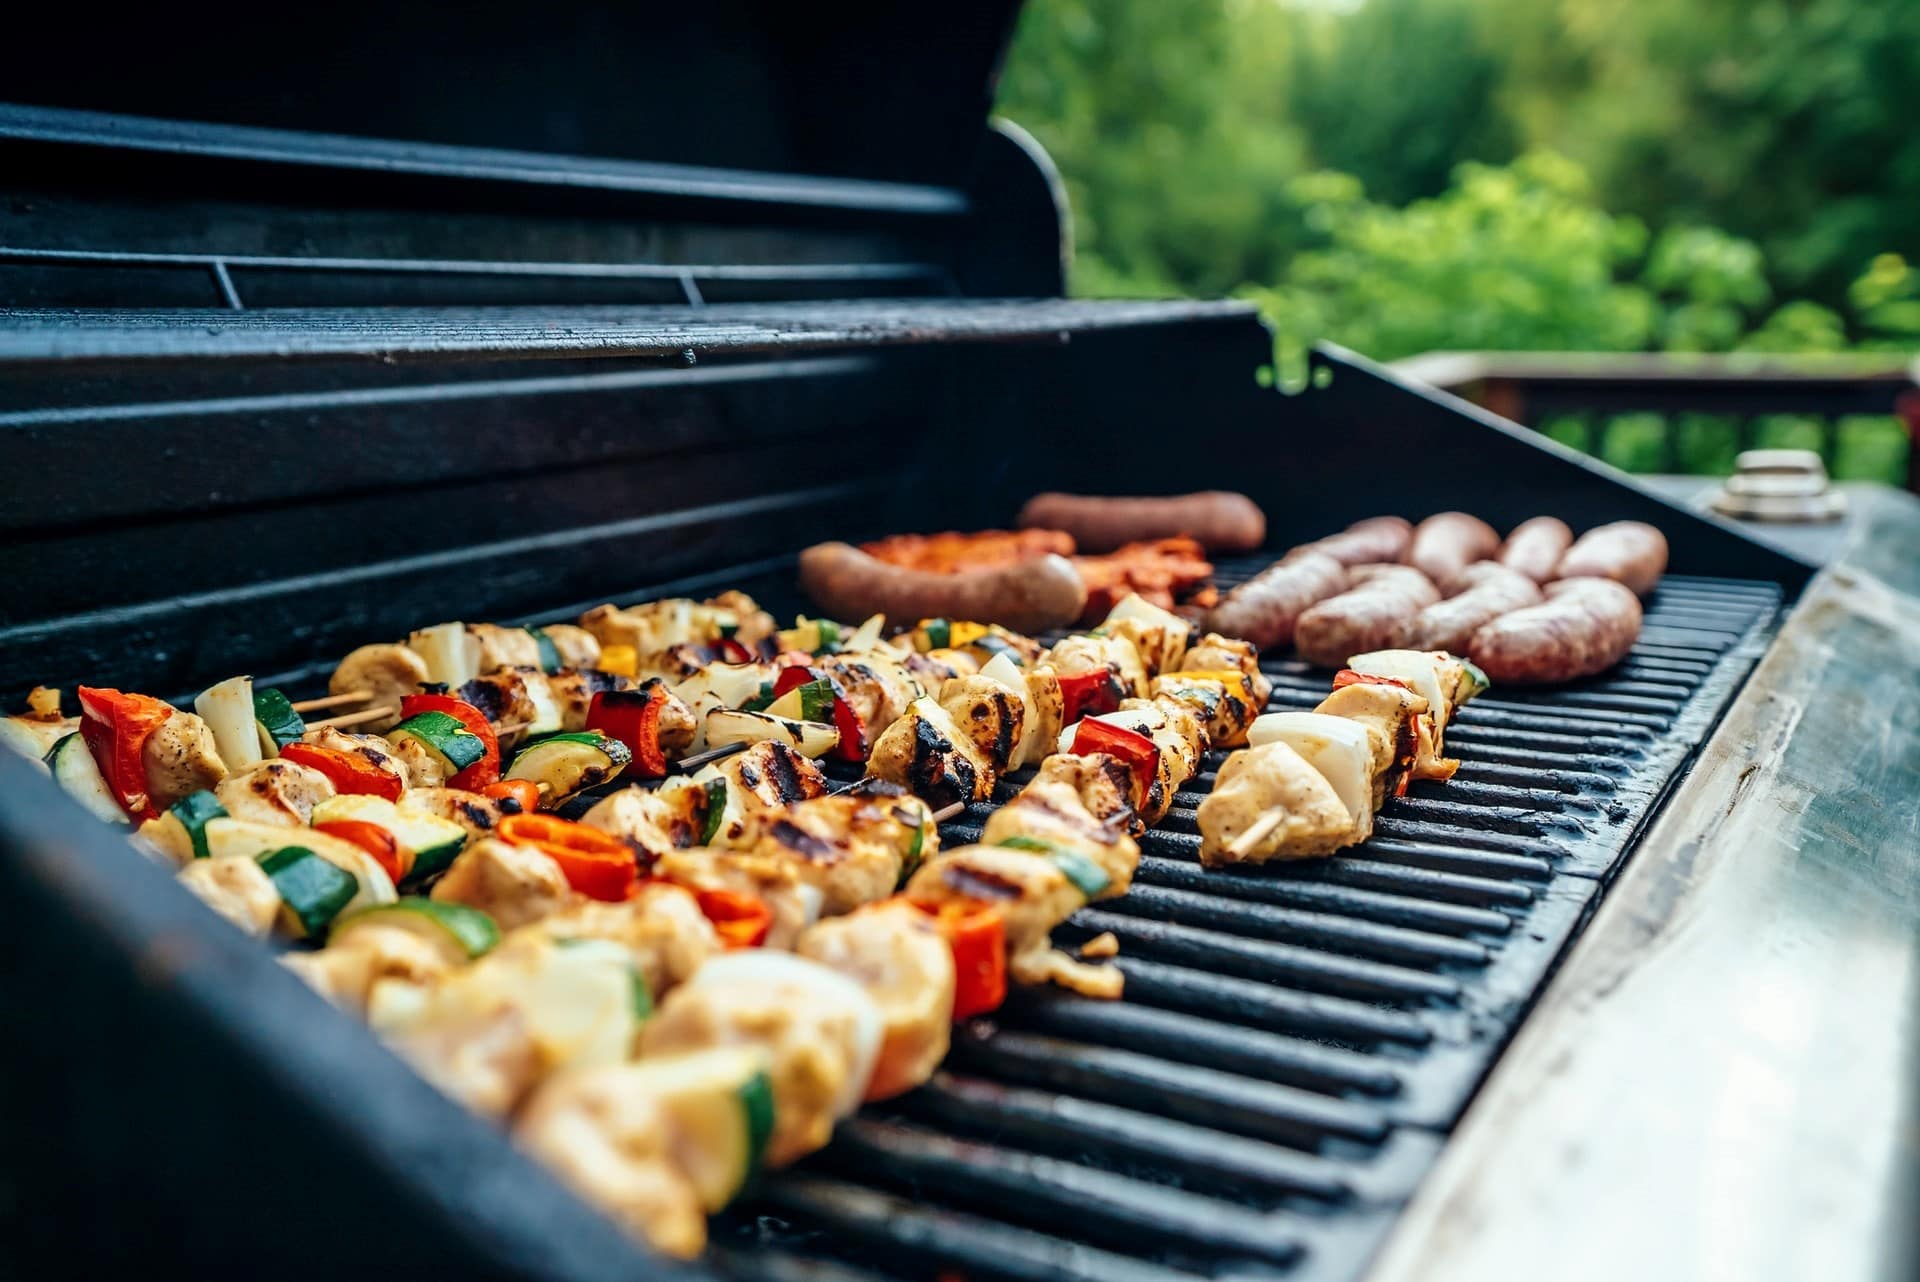 5 Quick Tips in Grilling Meat for Your Outdoor BBQ